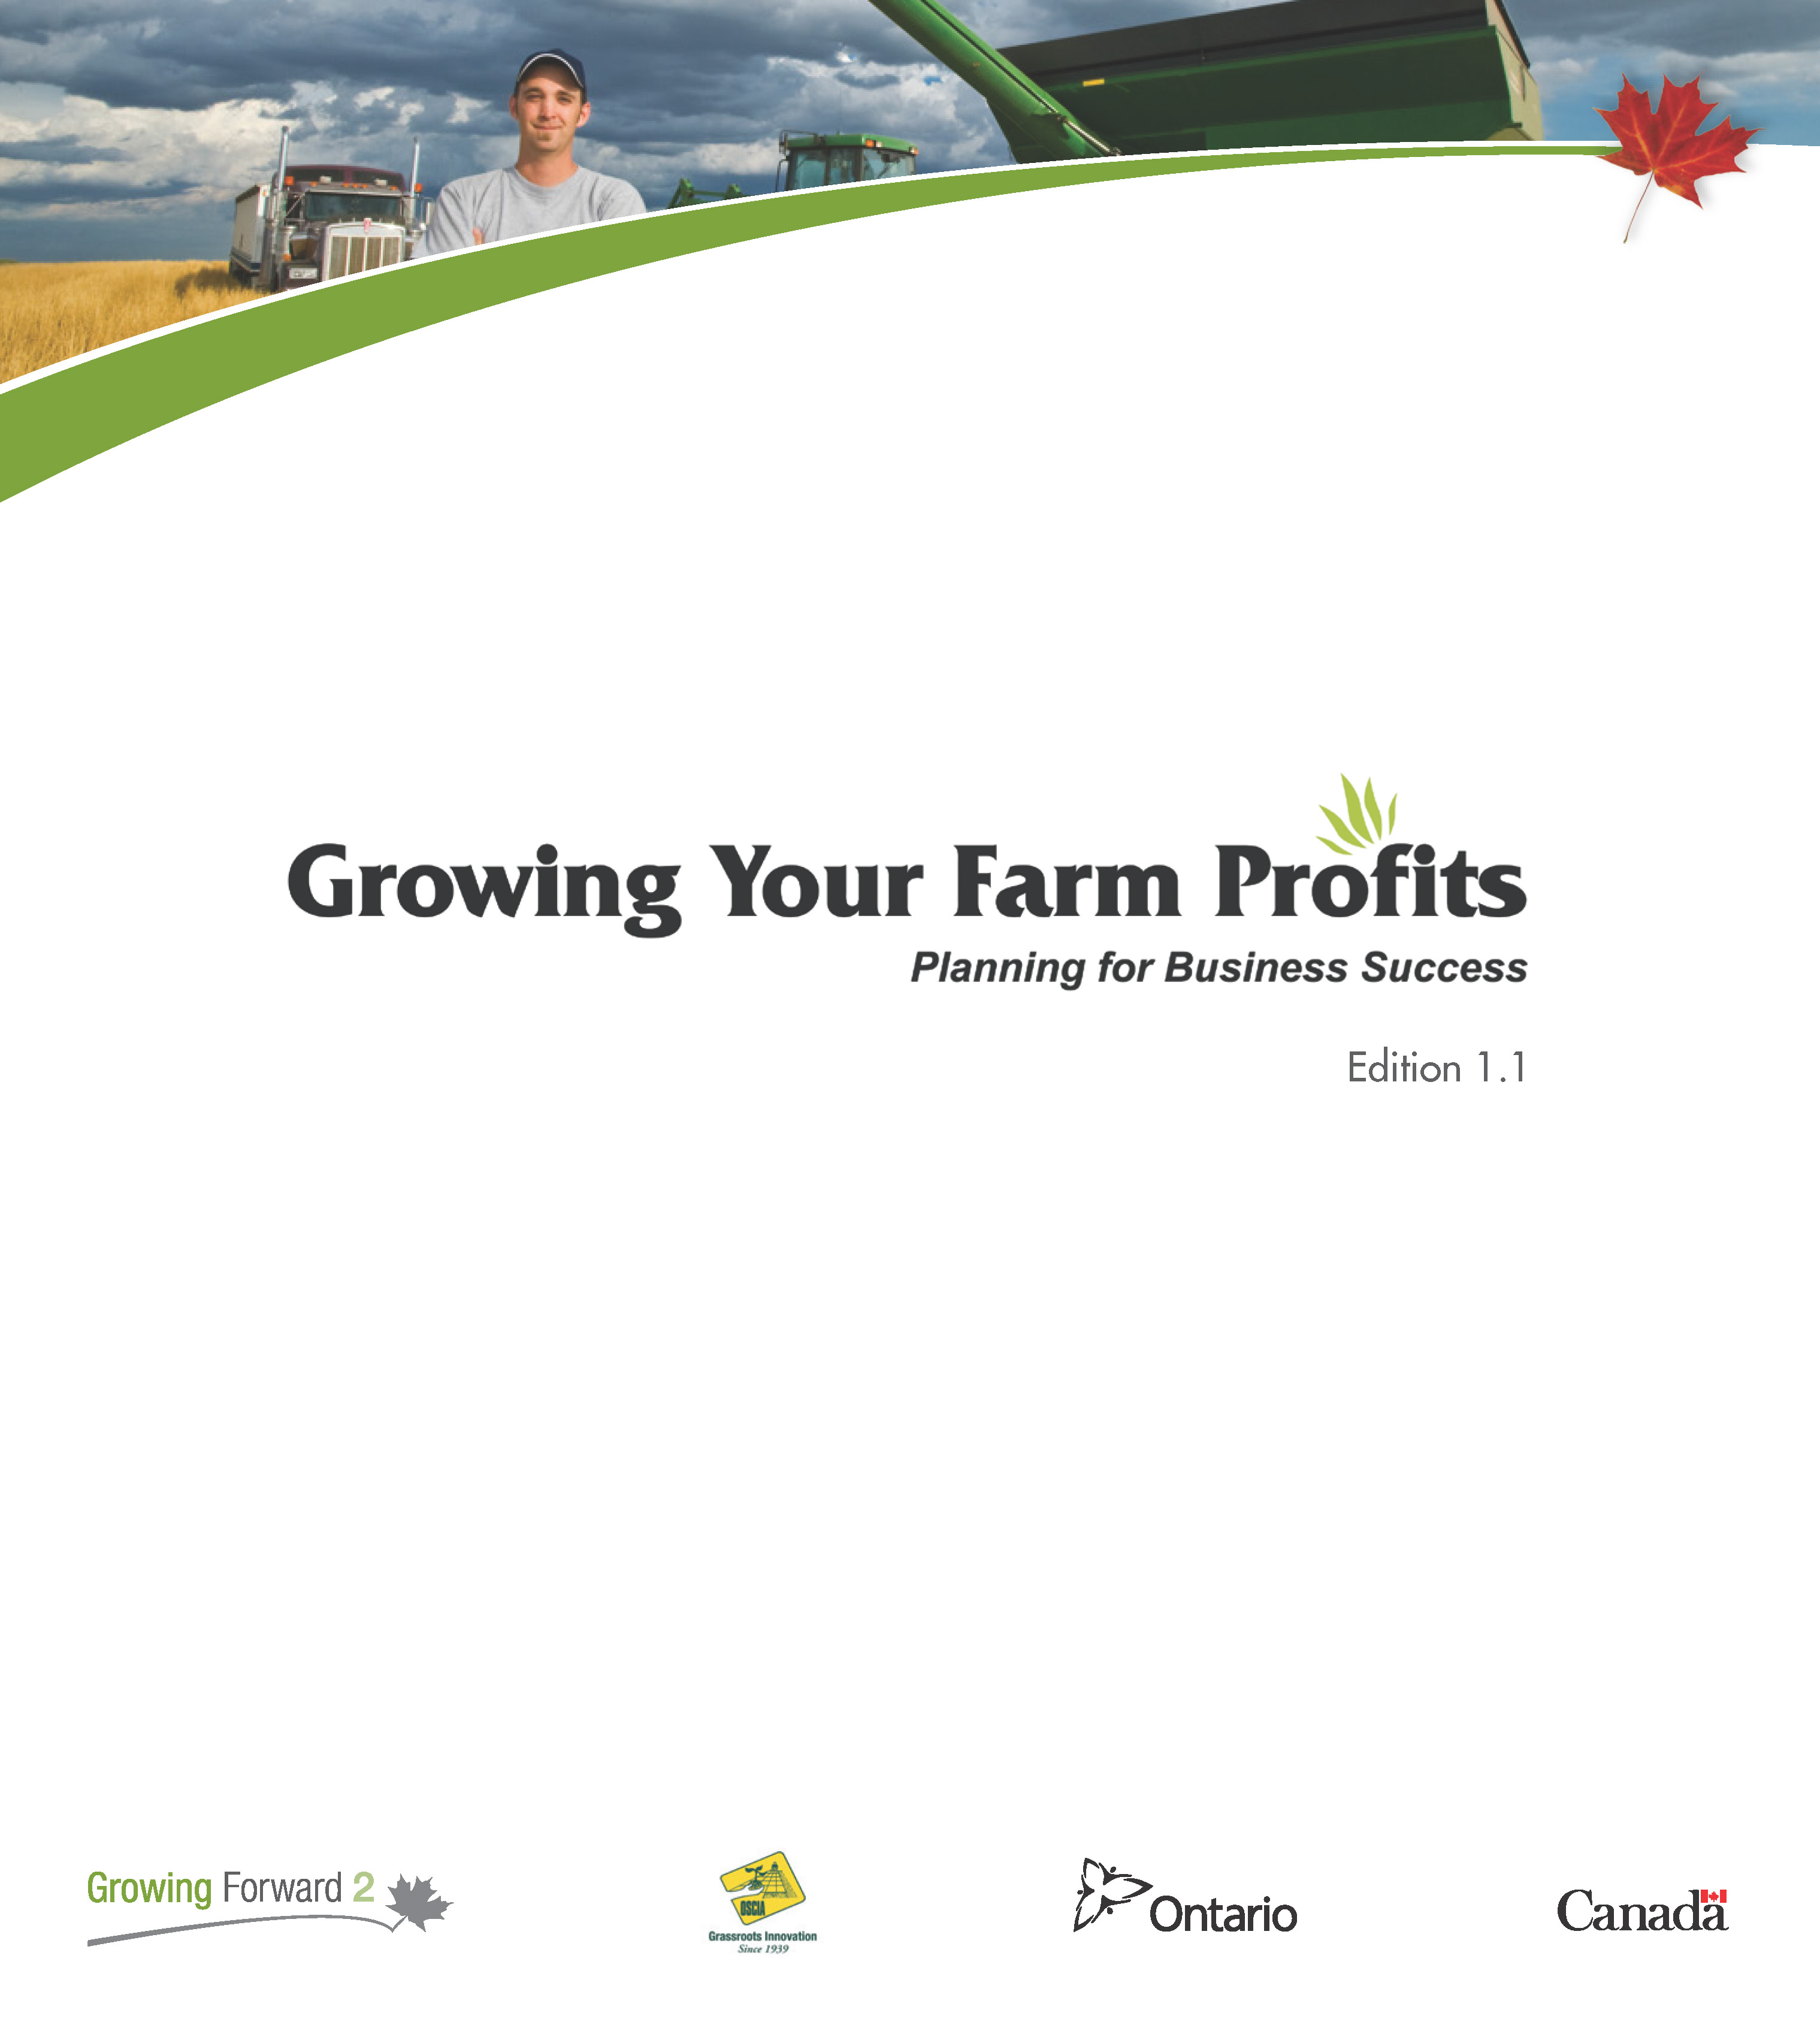 Growing Your Farm Profits workbook cover (English)